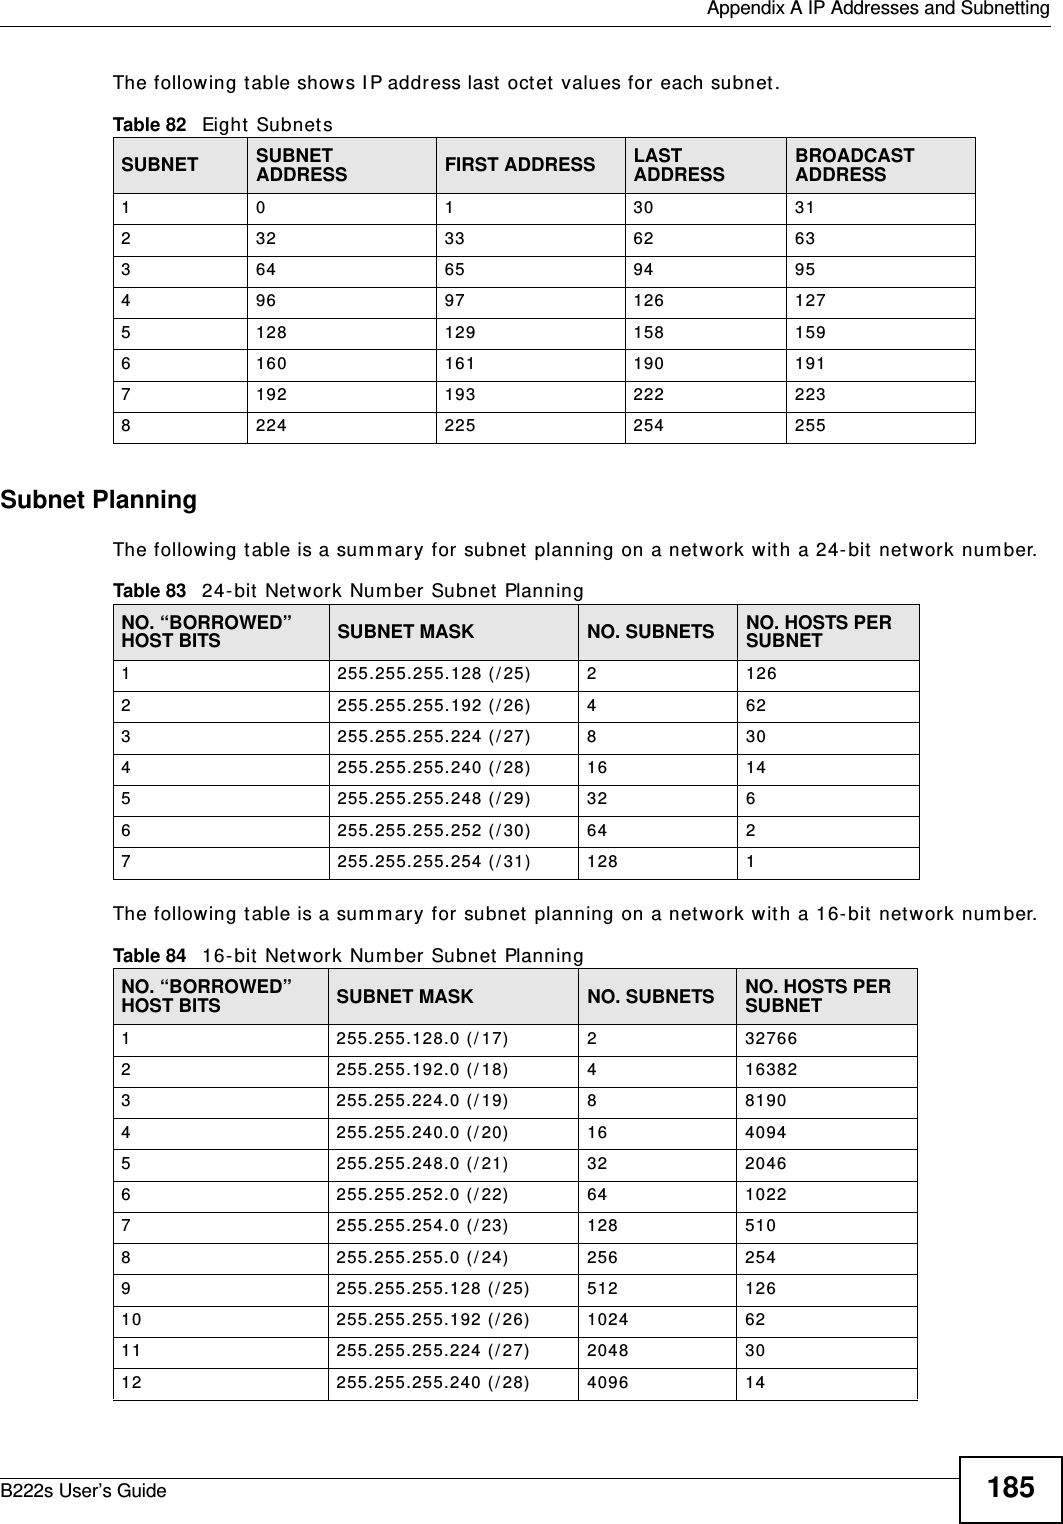  Appendix A IP Addresses and SubnettingB222s User’s Guide 185The following t able shows I P address last octet  values for each subnet .Subnet PlanningThe following table is a sum m ar y for subnet  planning on a net work wit h a 24- bit  net work num ber.The following table is a sum m ar y for subnet  planning on a net work wit h a 16- bit  net work num ber. Table 82   Eight  Subnet sSUBNET SUBNET ADDRESS FIRST ADDRESS LAST ADDRESSBROADCAST ADDRESS1 0 1 30 31232 33 62 63364 65 94 95496 97 126 1275128 129 158 1596160 161 190 1917192 193 222 2238224 225 254 255Table 83   24- bit  Networ k Num ber Subnet  PlanningNO. “BORROWED” HOST BITS SUBNET MASK NO. SUBNETS NO. HOSTS PER SUBNET1255.255.255.128 ( / 25) 21262255.255.255.192 ( / 26) 4623255.255.255.224 ( / 27) 8304255.255.255.240 ( / 28) 16 145255.255.255.248 ( / 29) 32 66255.255.255.252 ( / 30) 64 27255.255.255.254 ( / 31) 128 1Table 84   16- bit  Networ k Num ber Subnet  PlanningNO. “BORROWED” HOST BITS SUBNET MASK NO. SUBNETS NO. HOSTS PER SUBNET1255.255.128.0 (/ 17) 2327662255.255.192.0 (/ 18) 4163823255.255.224.0 (/ 19) 881904255.255.240.0 (/ 20) 16 40945255.255.248.0 (/ 21) 32 20466255.255.252.0 (/ 22) 64 10227255.255.254.0 (/ 23) 128 5108255.255.255.0 (/ 24) 256 2549255.255.255.128 ( / 25) 512 12610 255.255.255.192 ( / 26) 1024 6211 255.255.255.224 ( / 27) 2048 3012 255.255.255.240 ( / 28) 4096 14